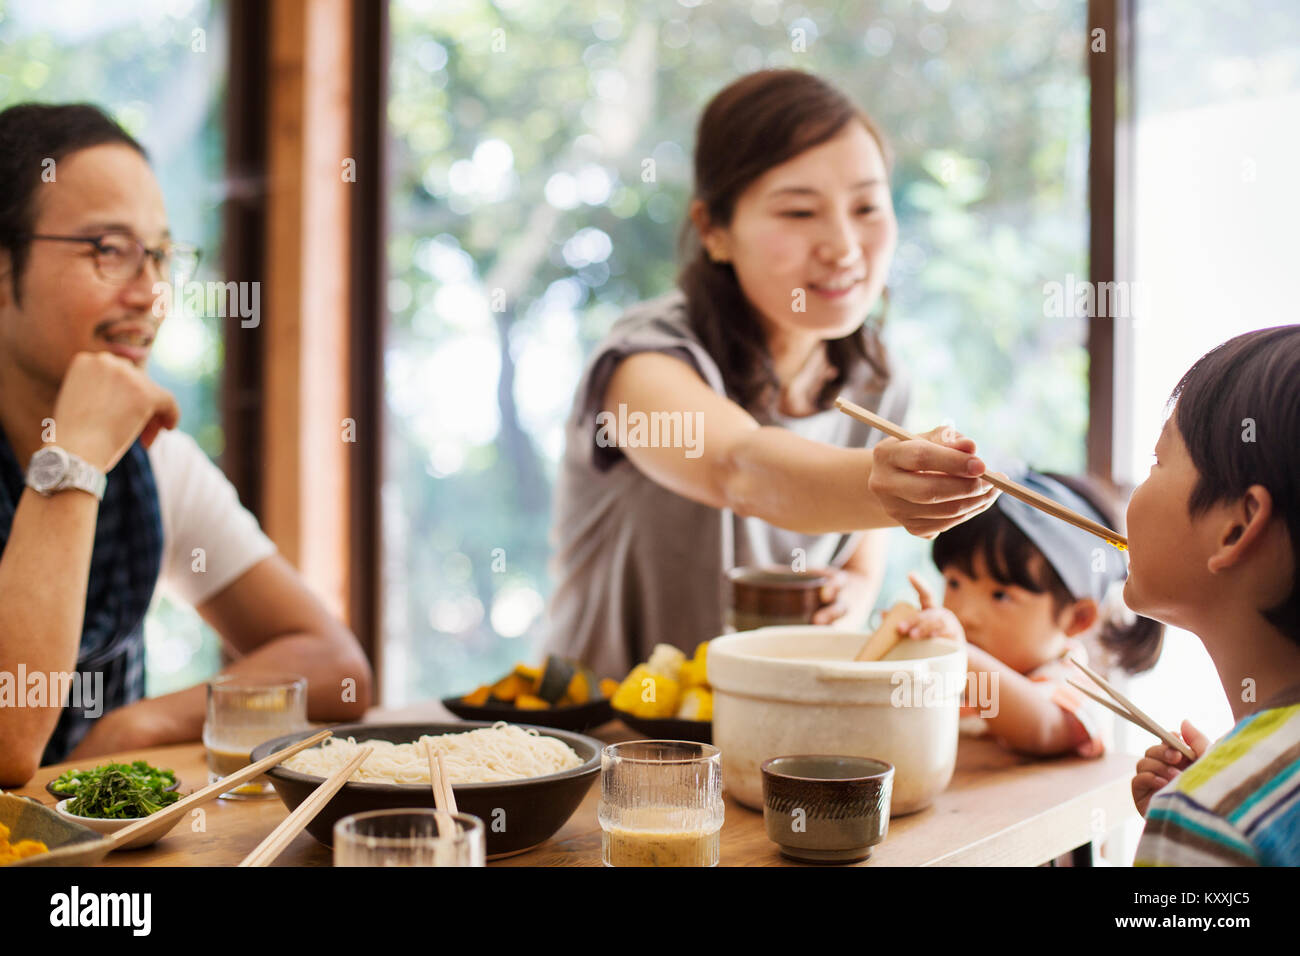 Man, woman and boy sitting round a table with bowls of food, eating together. Stock Photo